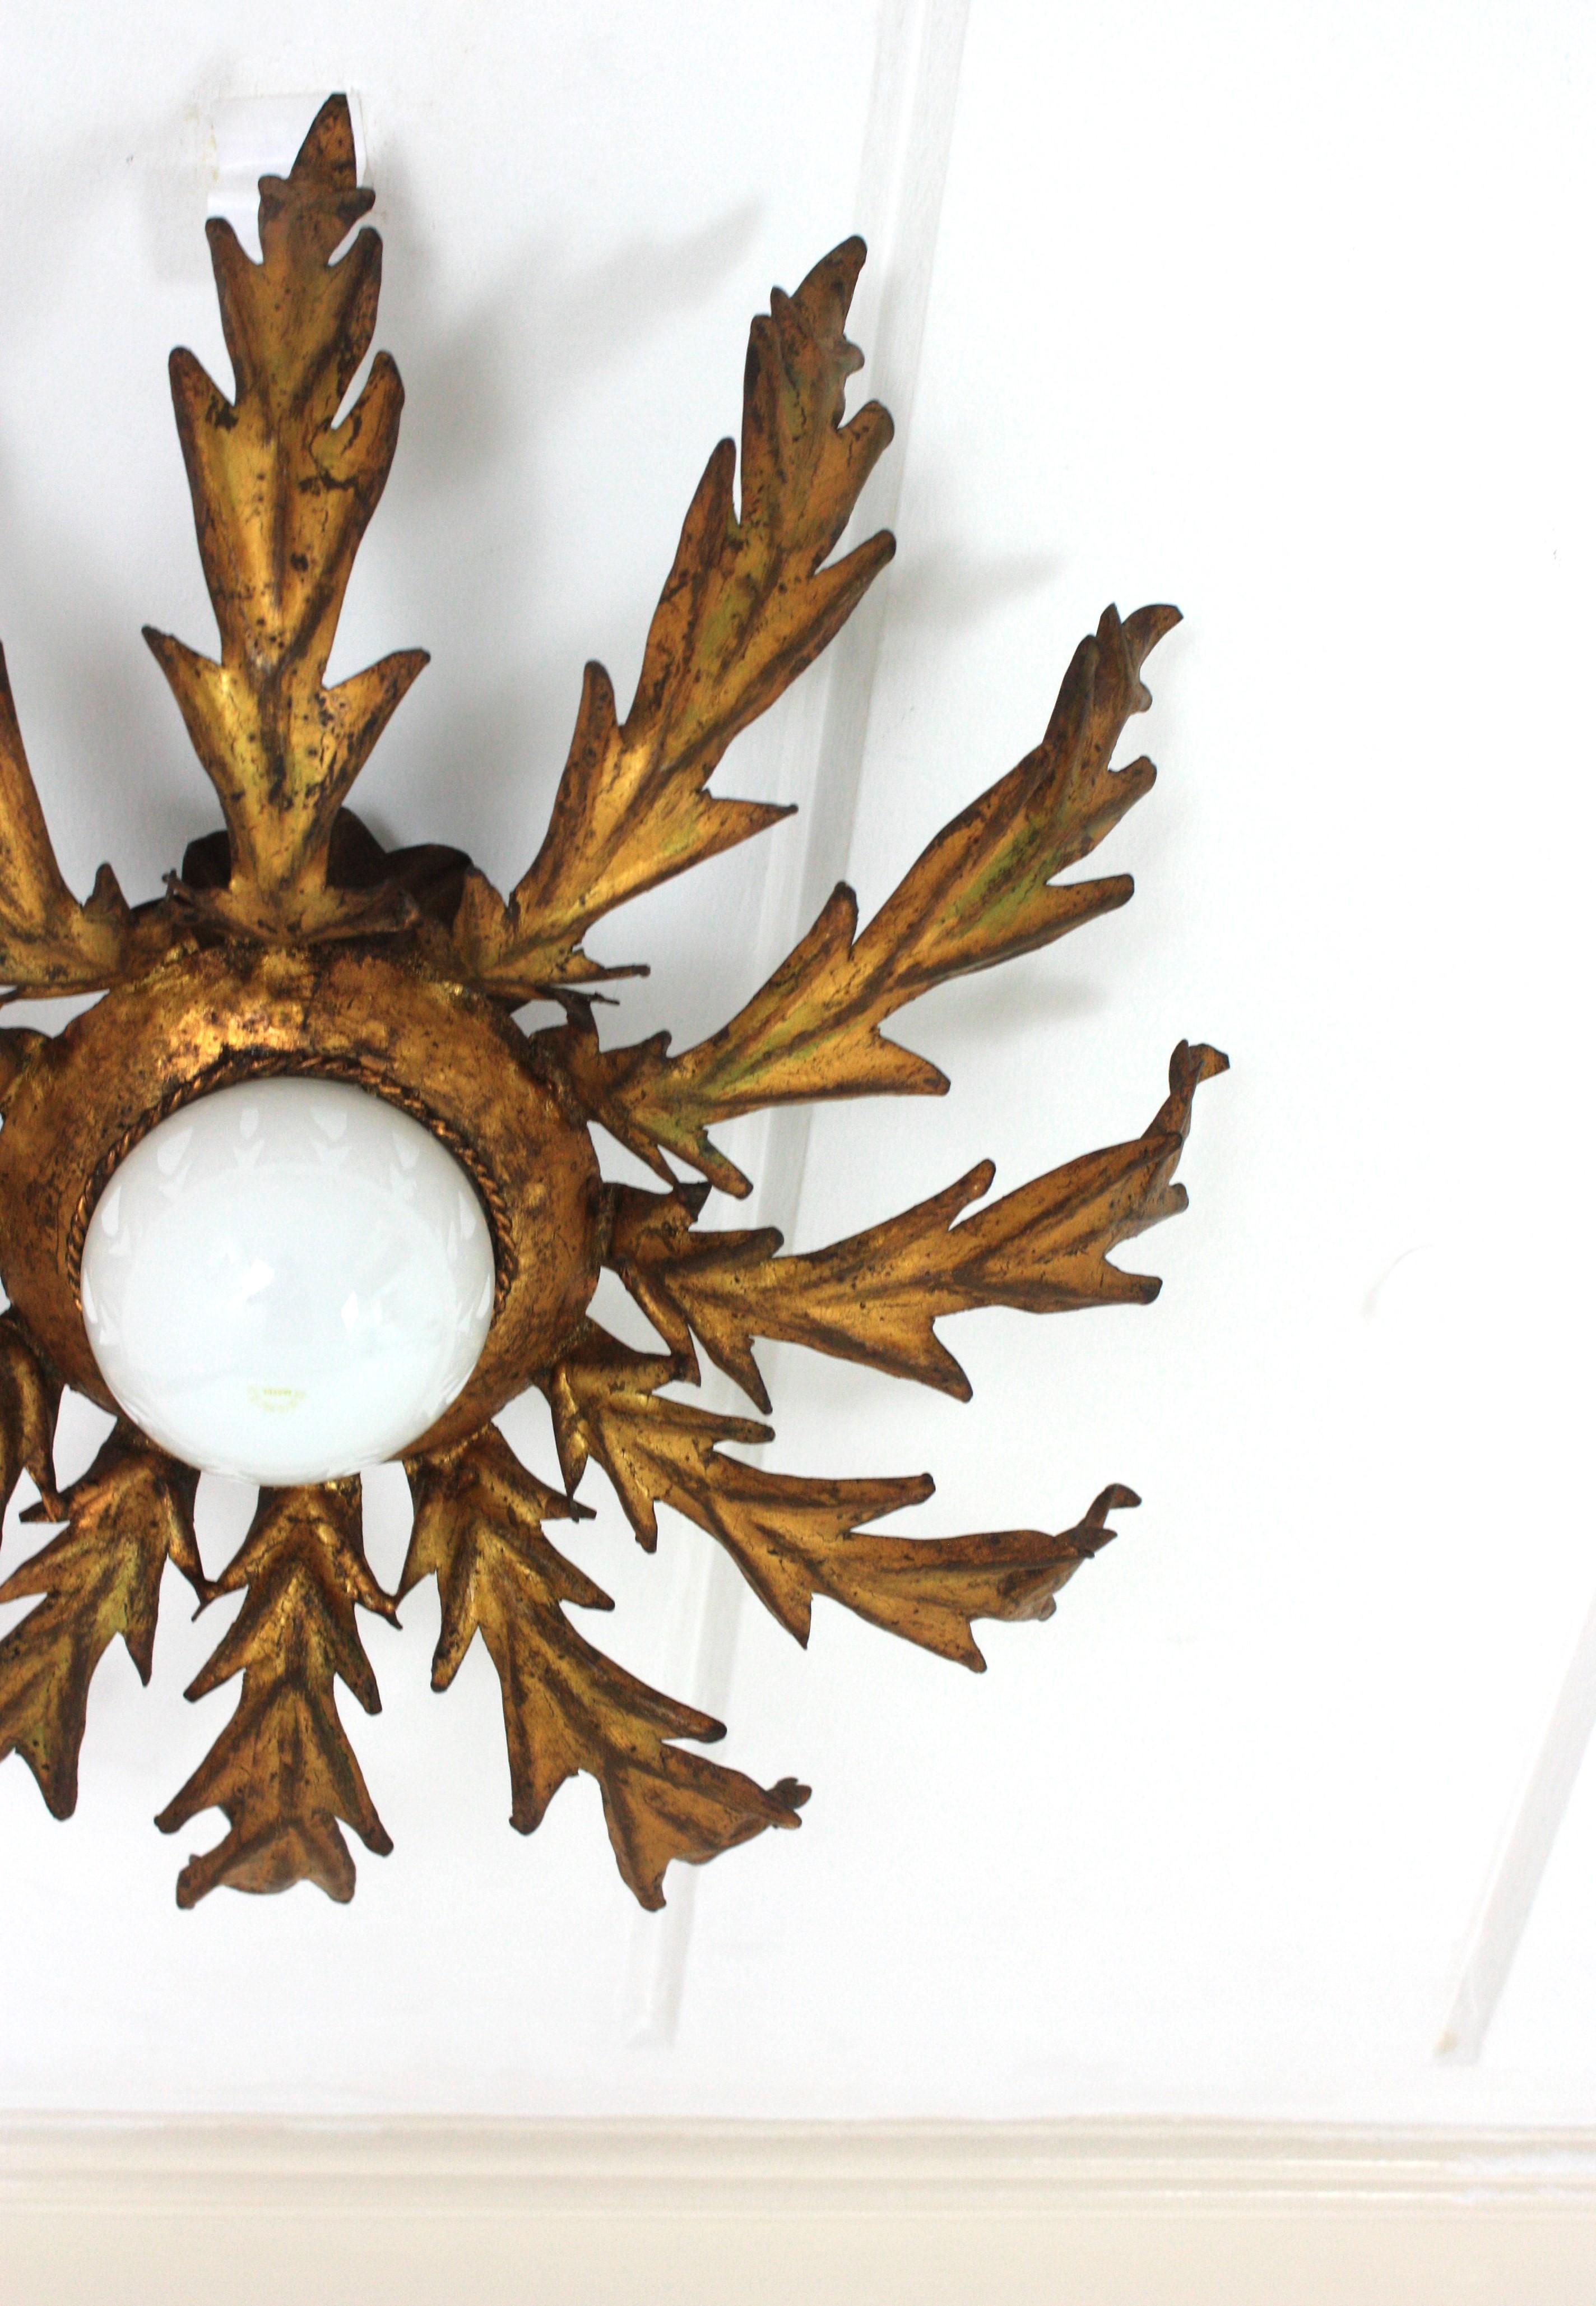 French Sunburst Leafed Ceiling Light Fixture in Gilt Iron, 1940s For Sale 8